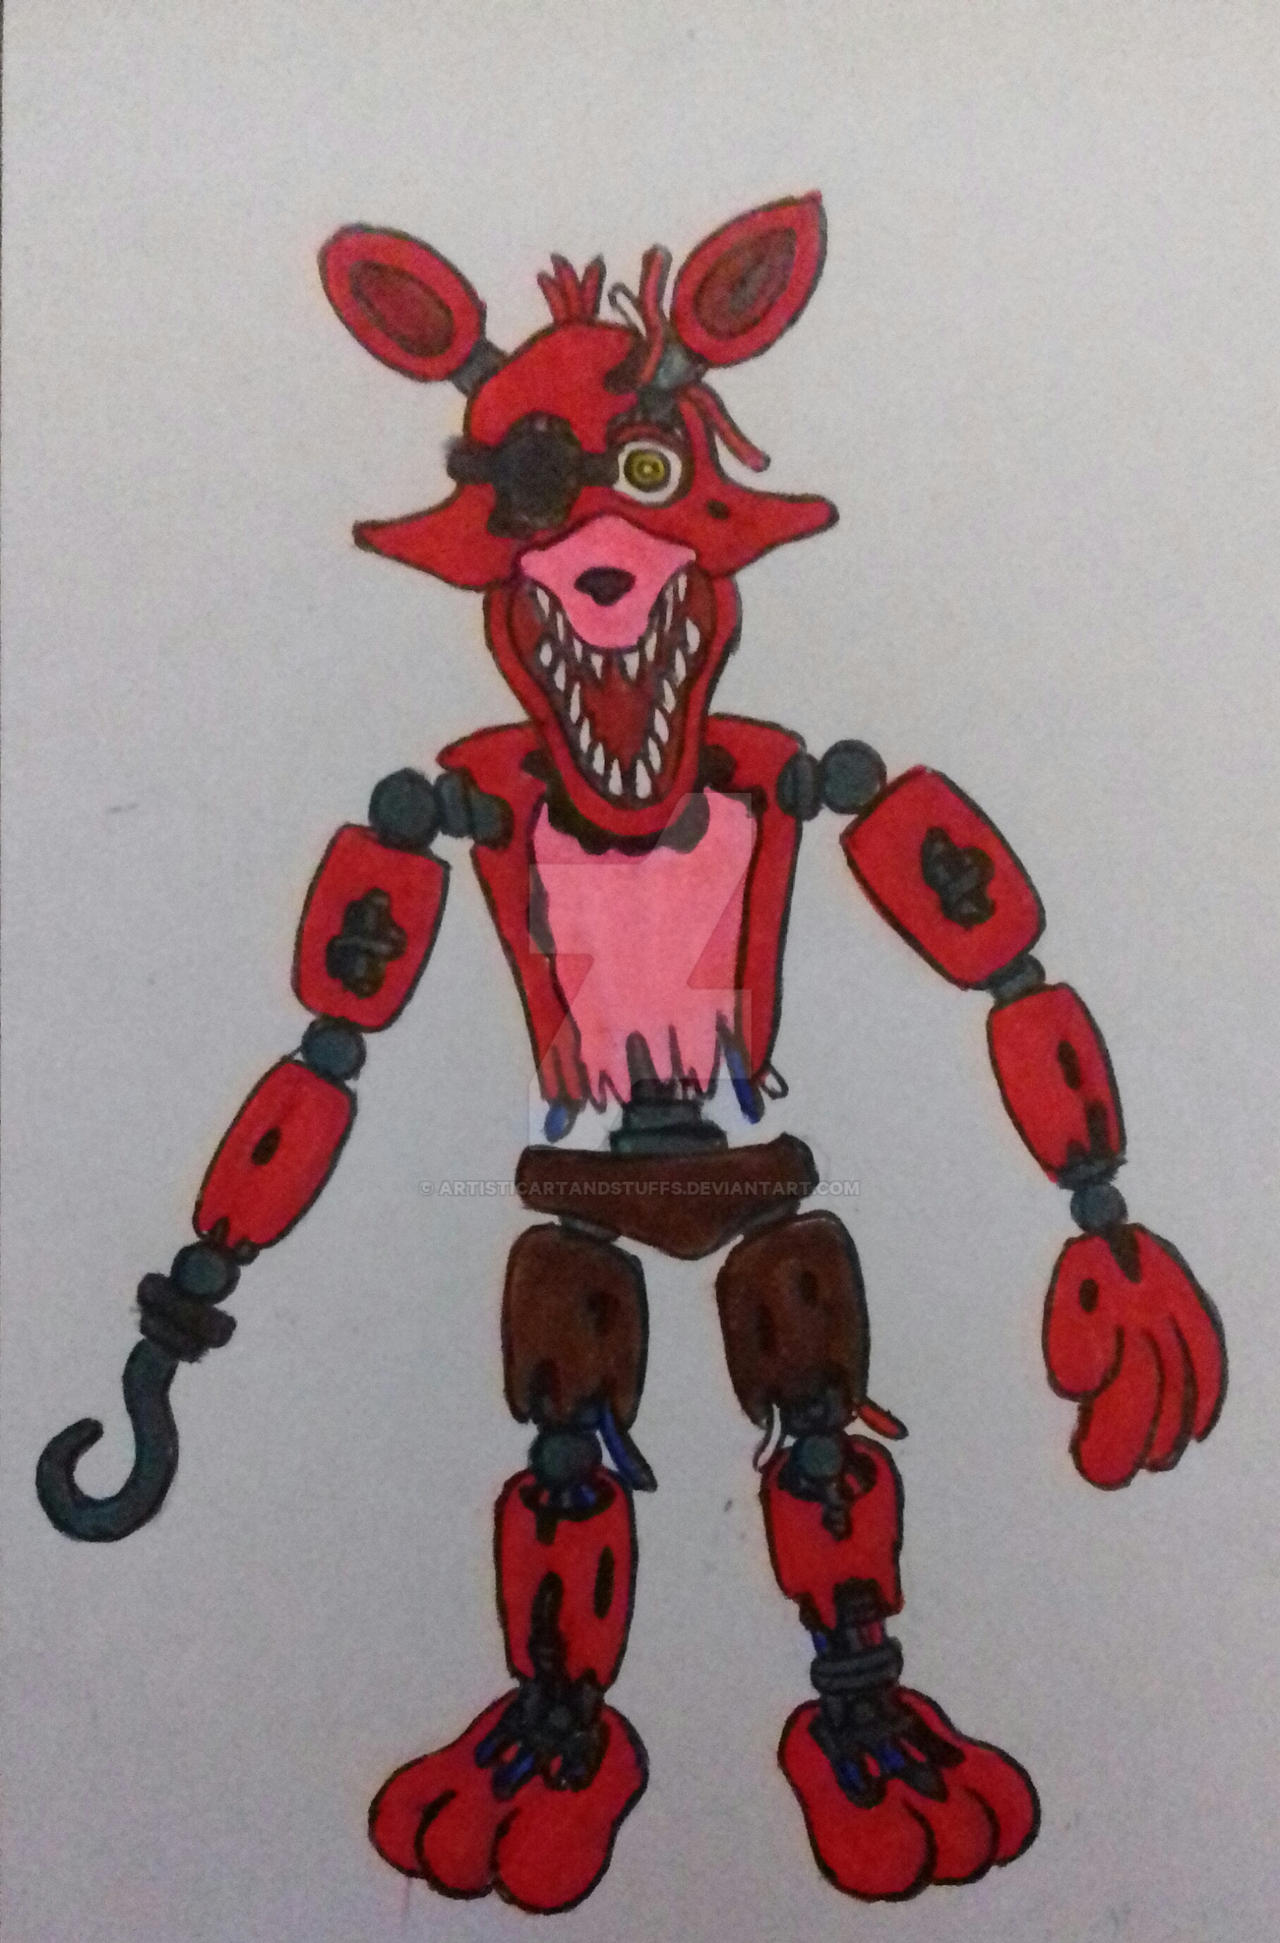 Pixilart - terrible withered foxy by Dawkoyt